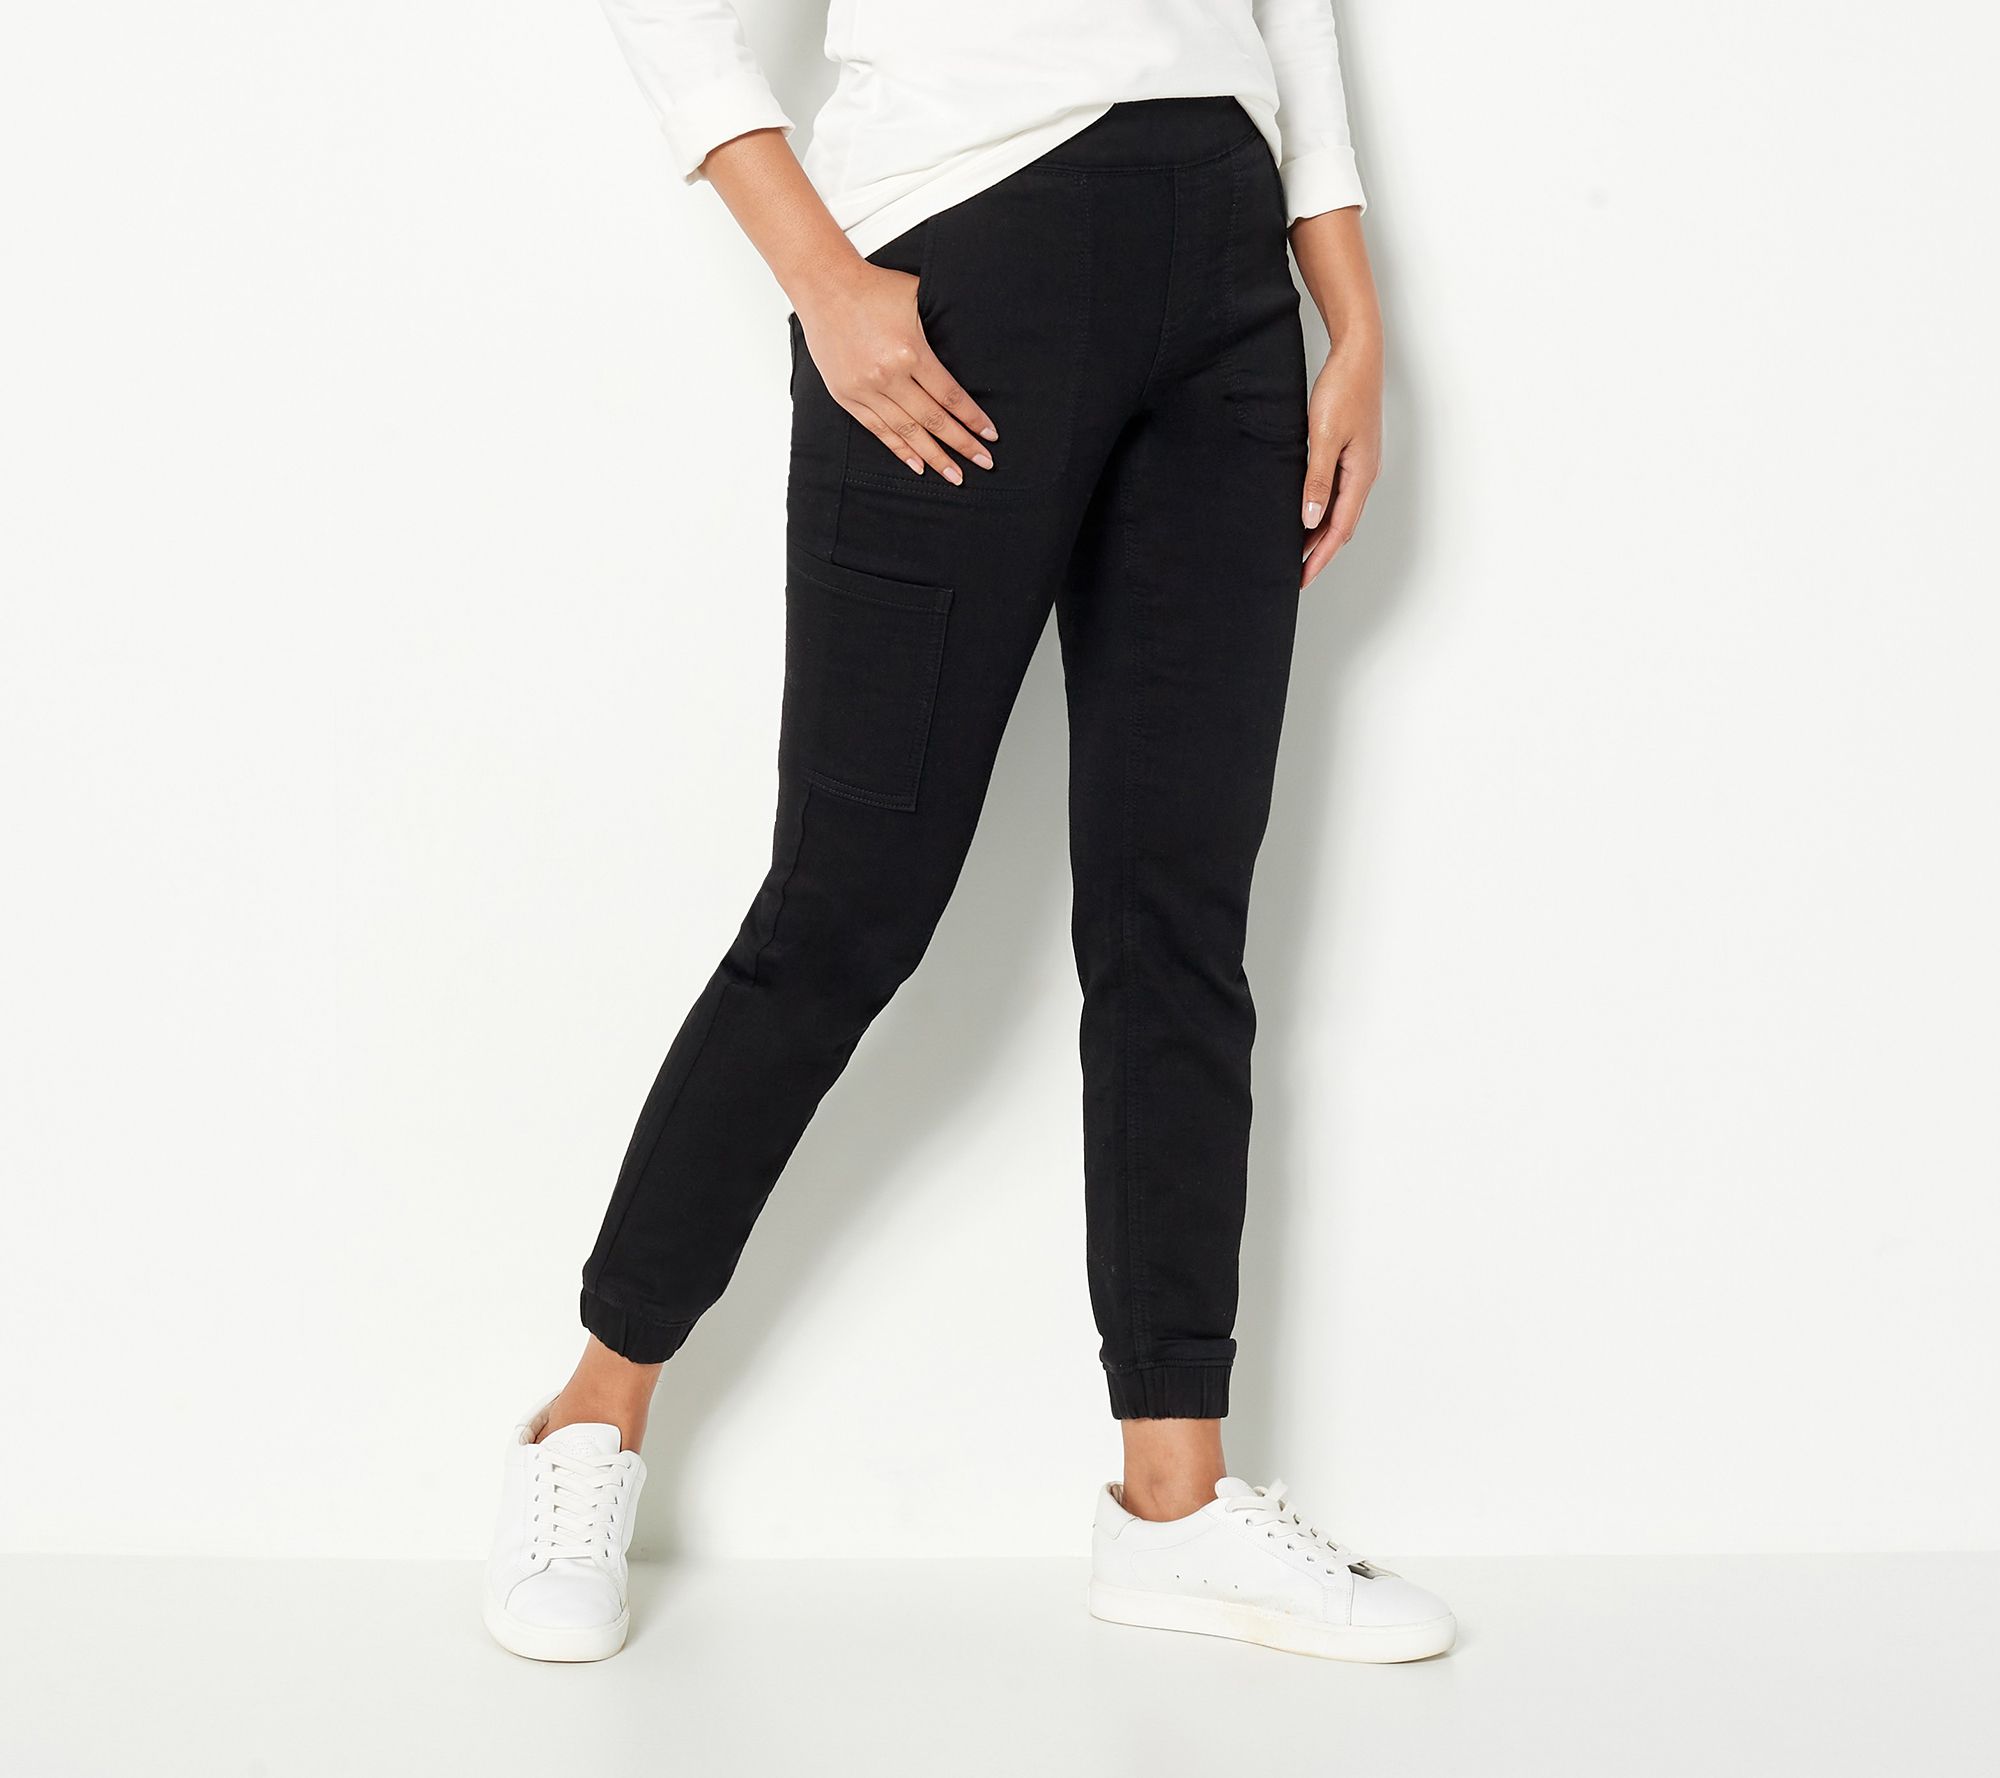 Denim & Co. Comfy Knit Air RegularStraight Crop Pant with Side Slits 